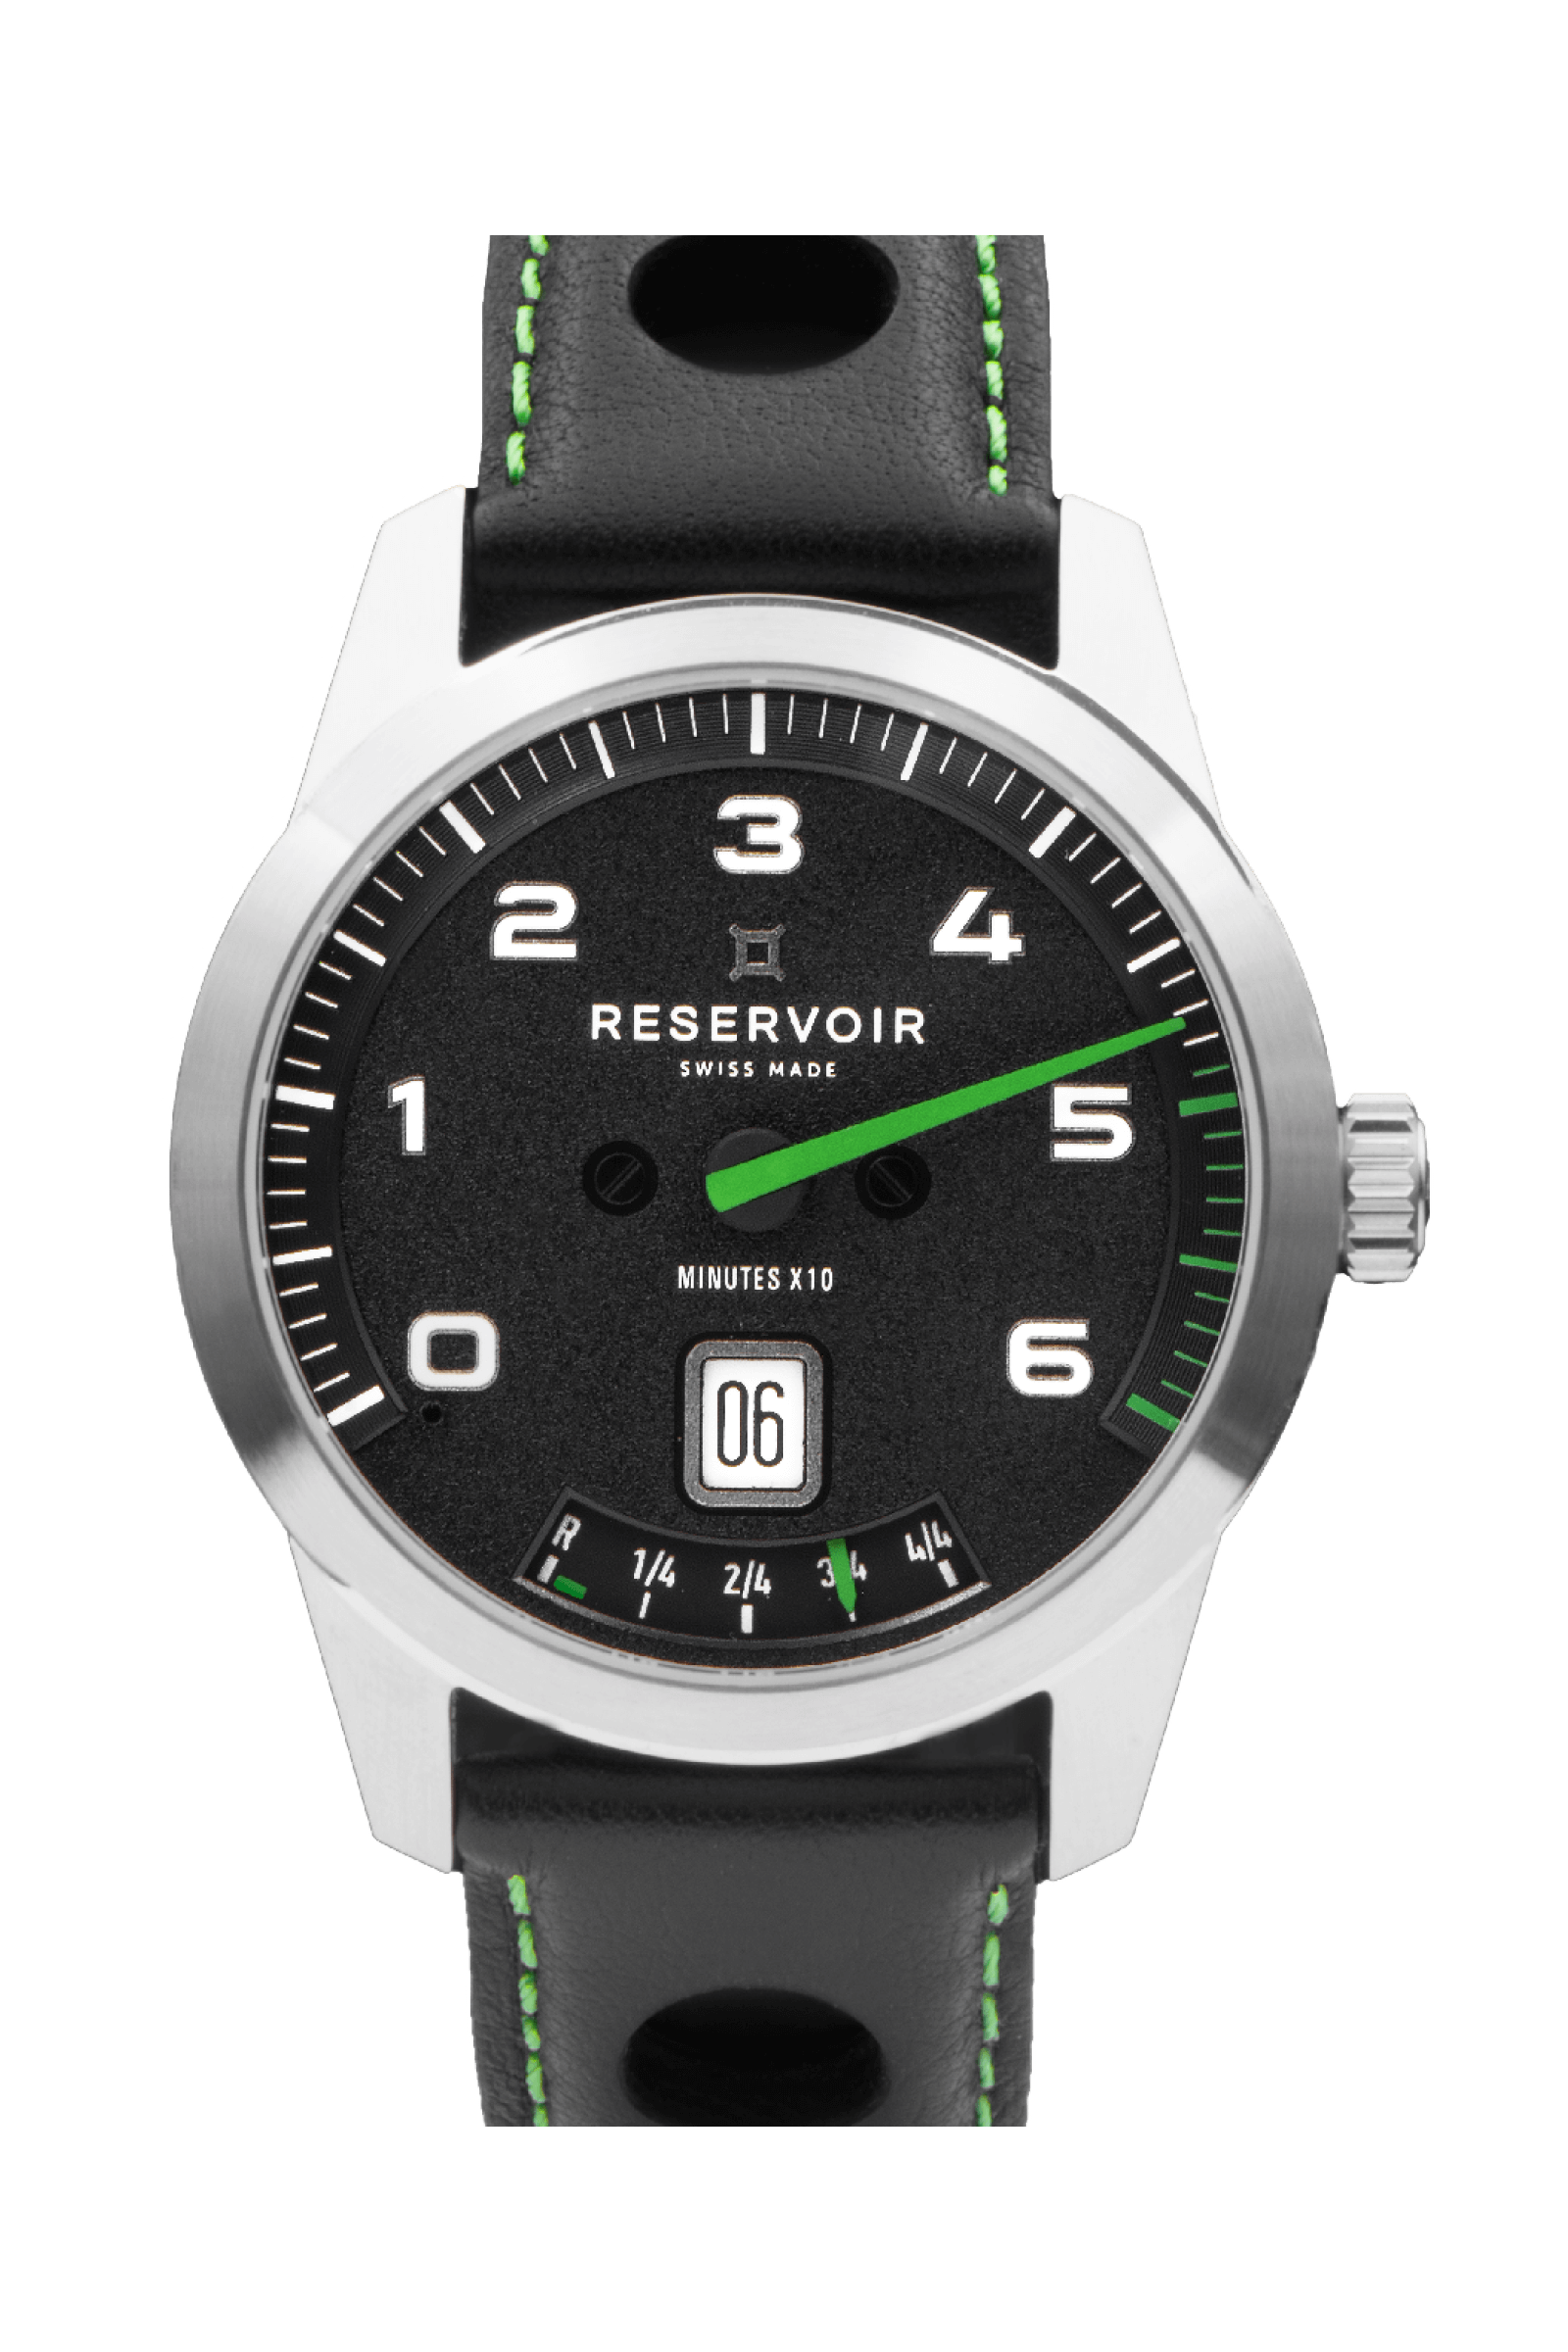 Media RESERVOIR watch in luxurious jet black, light grey and dark olive green colors.